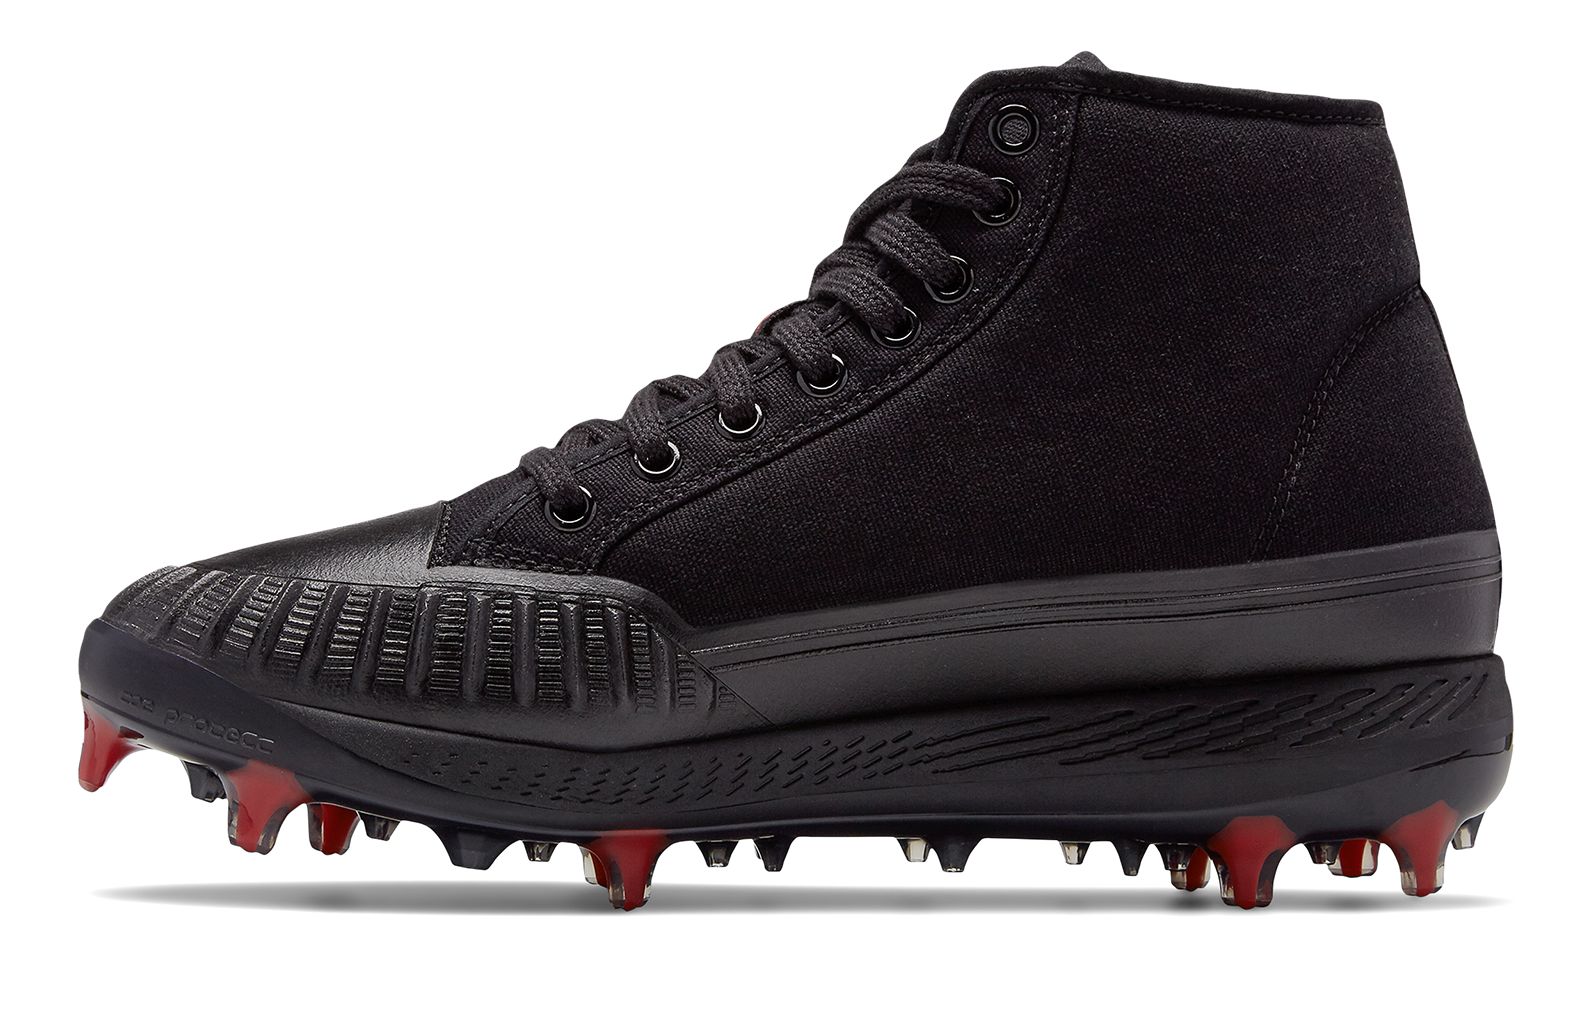 pf flyers molded cleats